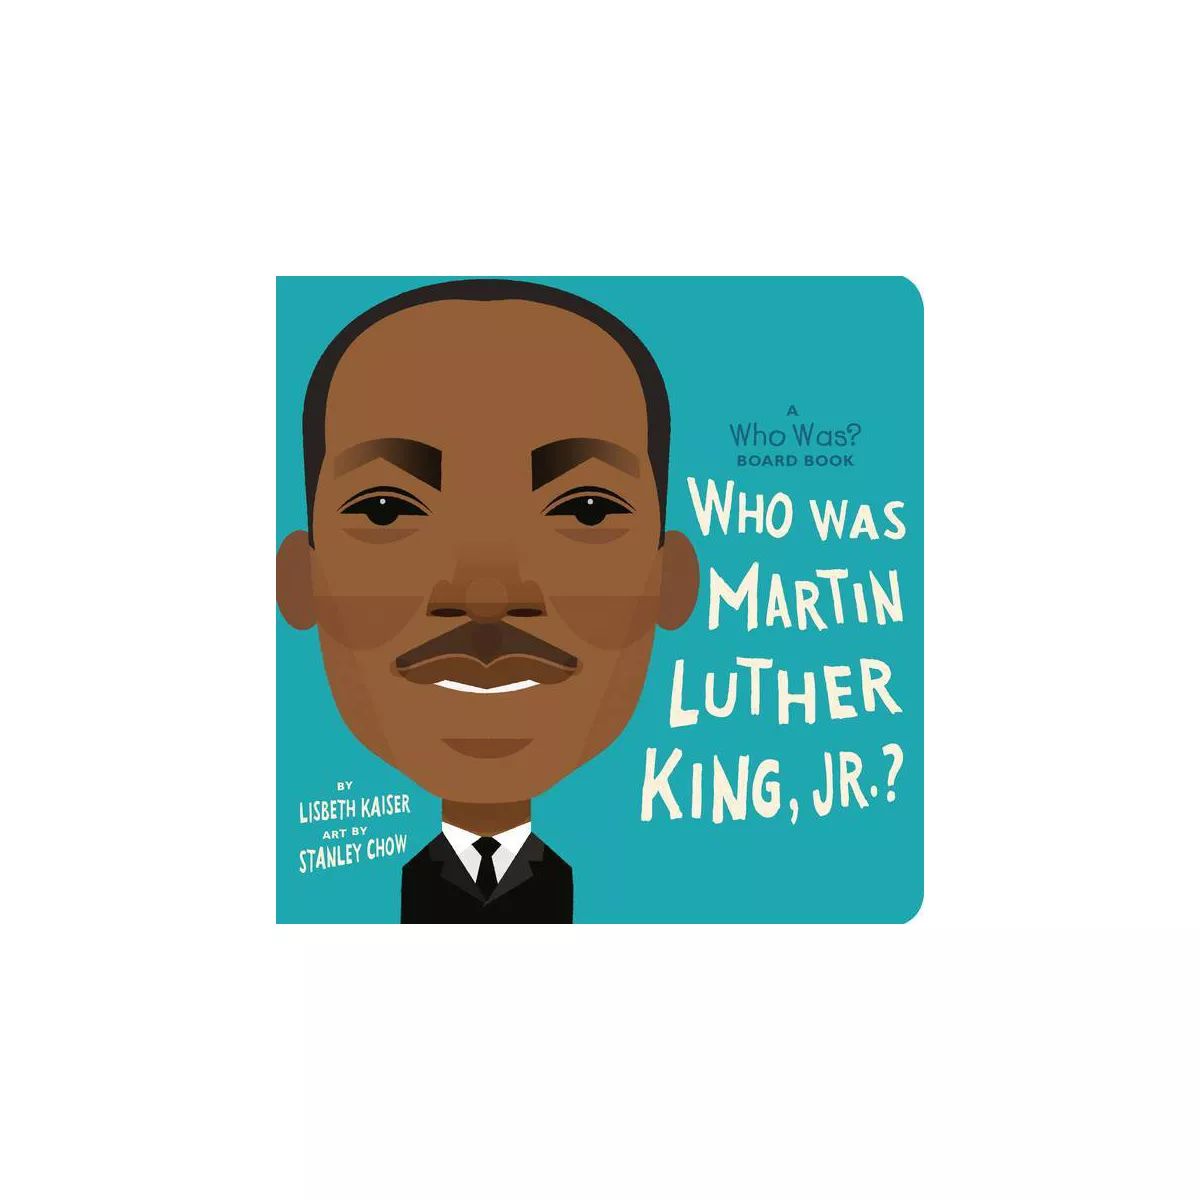 Who Was Martin Luther King, Jr.?: A Who Was? Board Book - (Who Was? Board Books) by Lisbeth Kaise... | Target